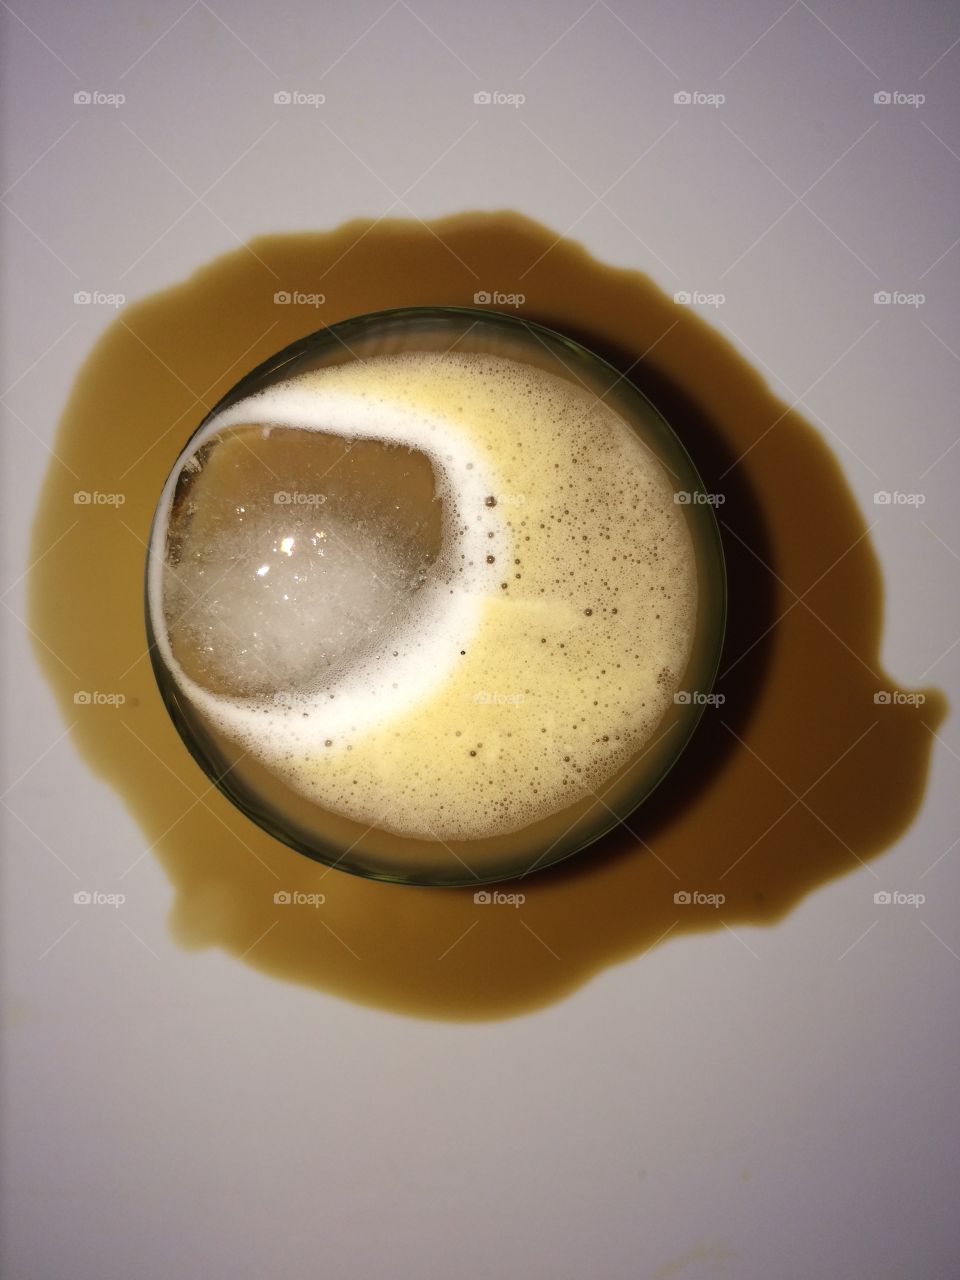 Top view Iced coffee with spill